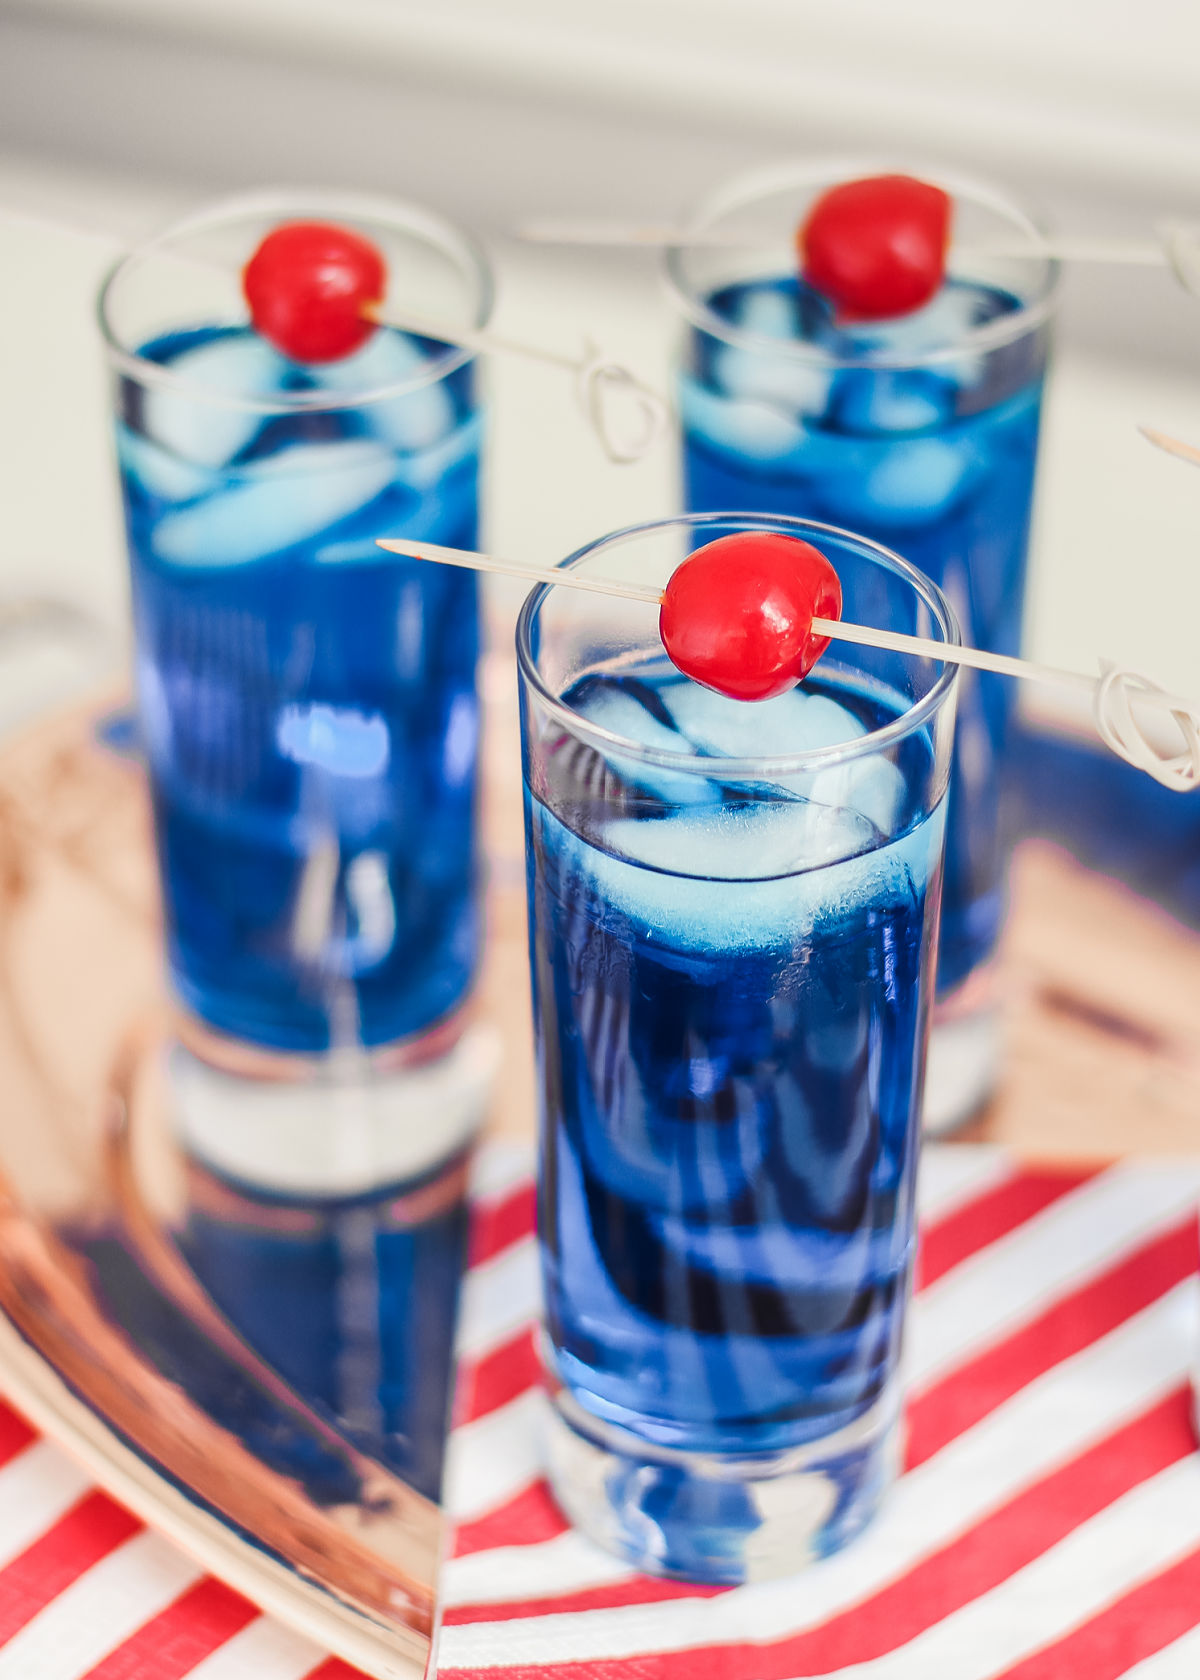 3 glasses with blue drink and cherry garnish on tray.